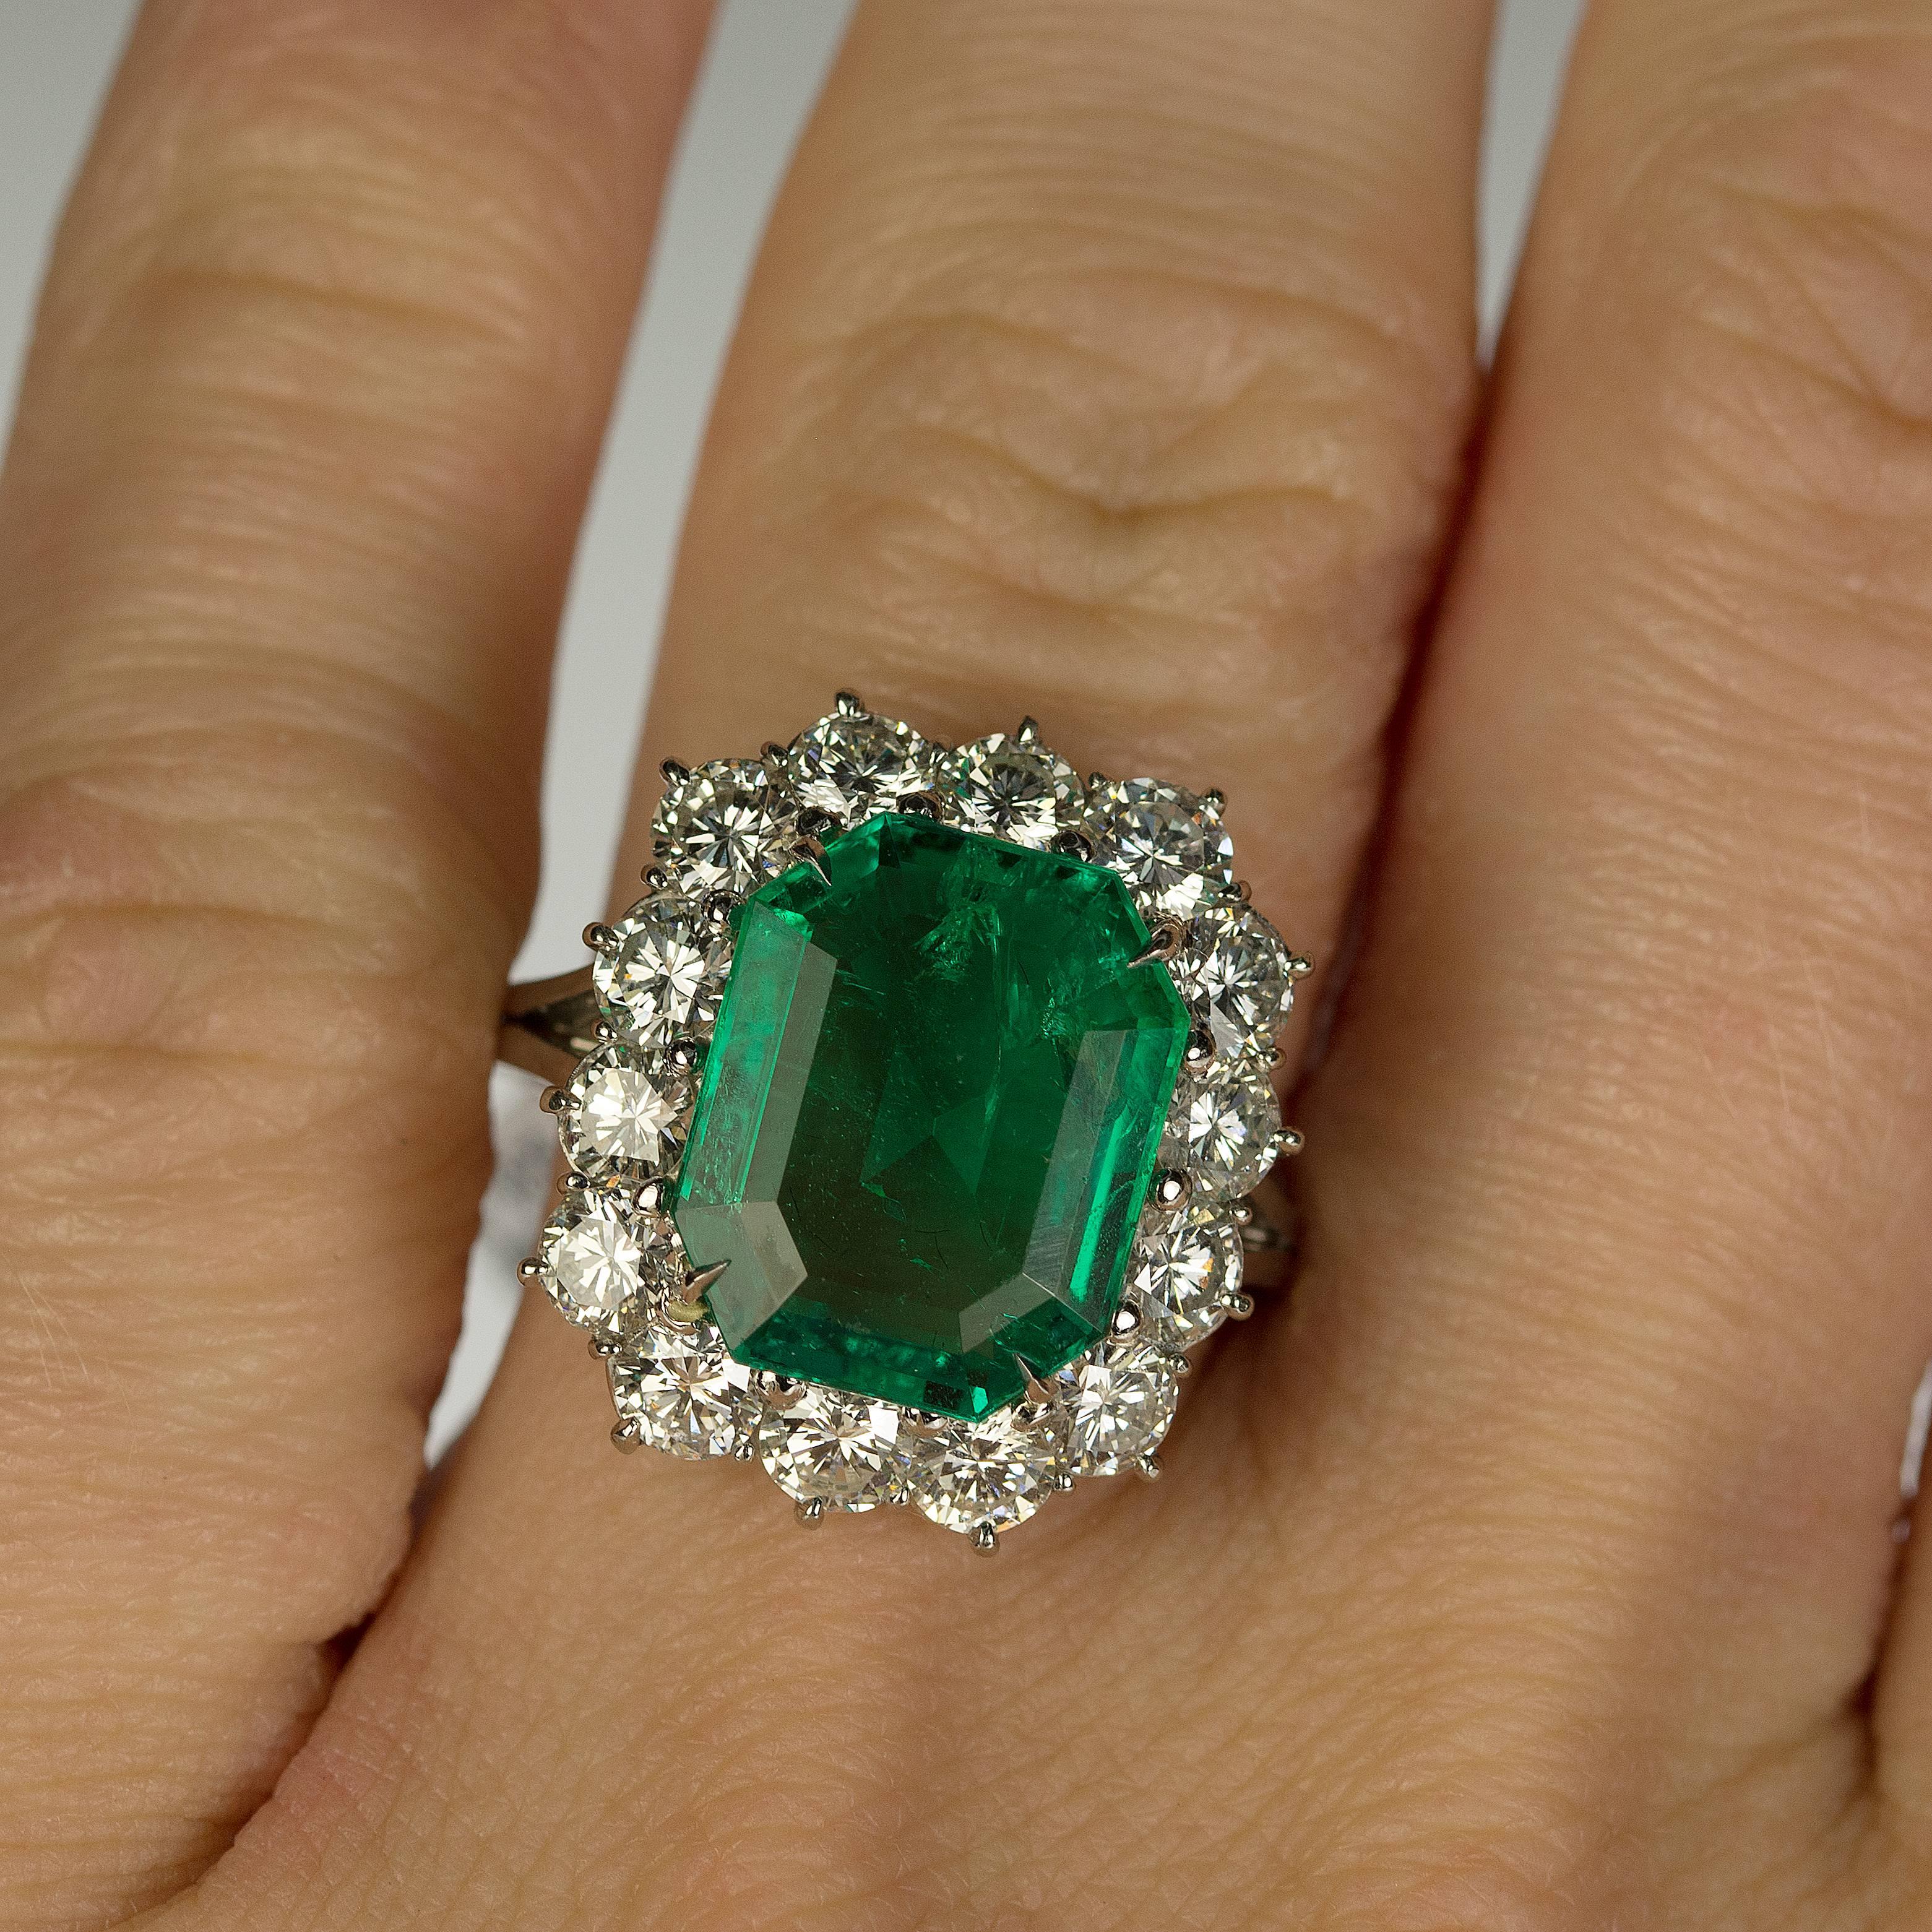 AGL Certified 6.01 carat "No Oil" Colombian emerald set in platinum with approximately 2.50 carats of colorless round brilliant diamonds.